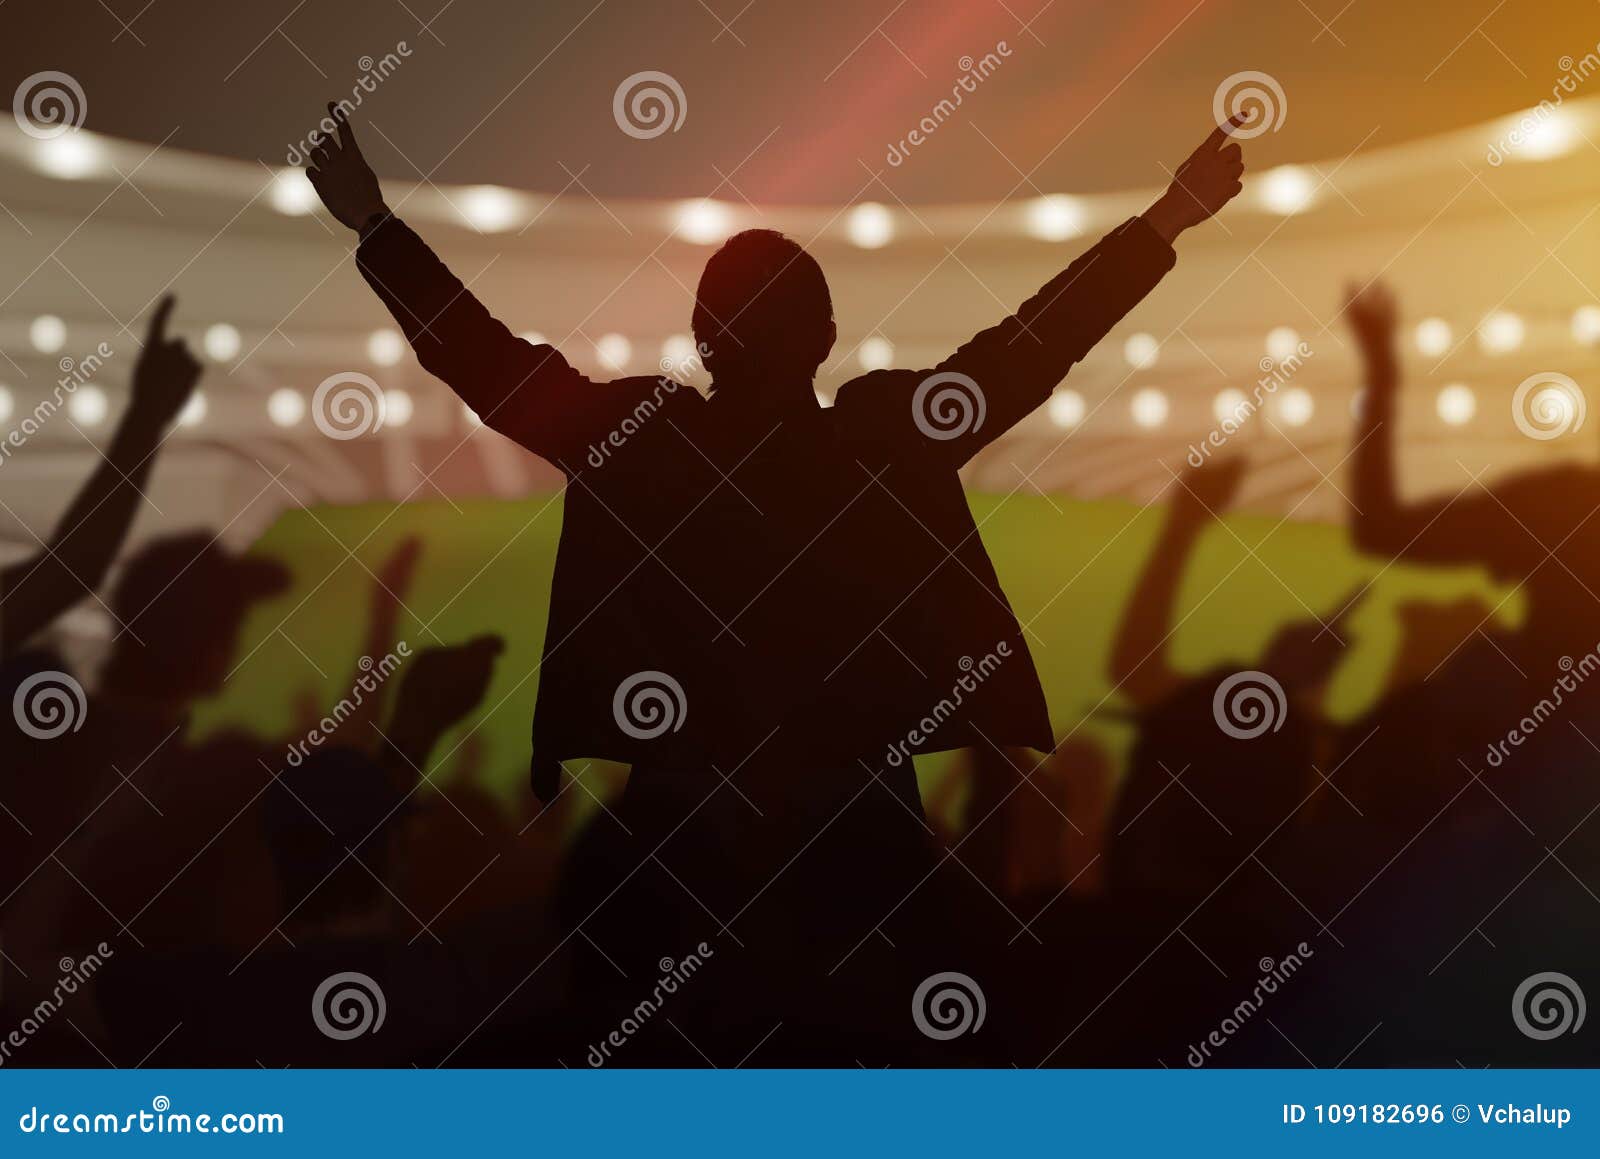 silhouettes of happy cheerful sport fans at stadium